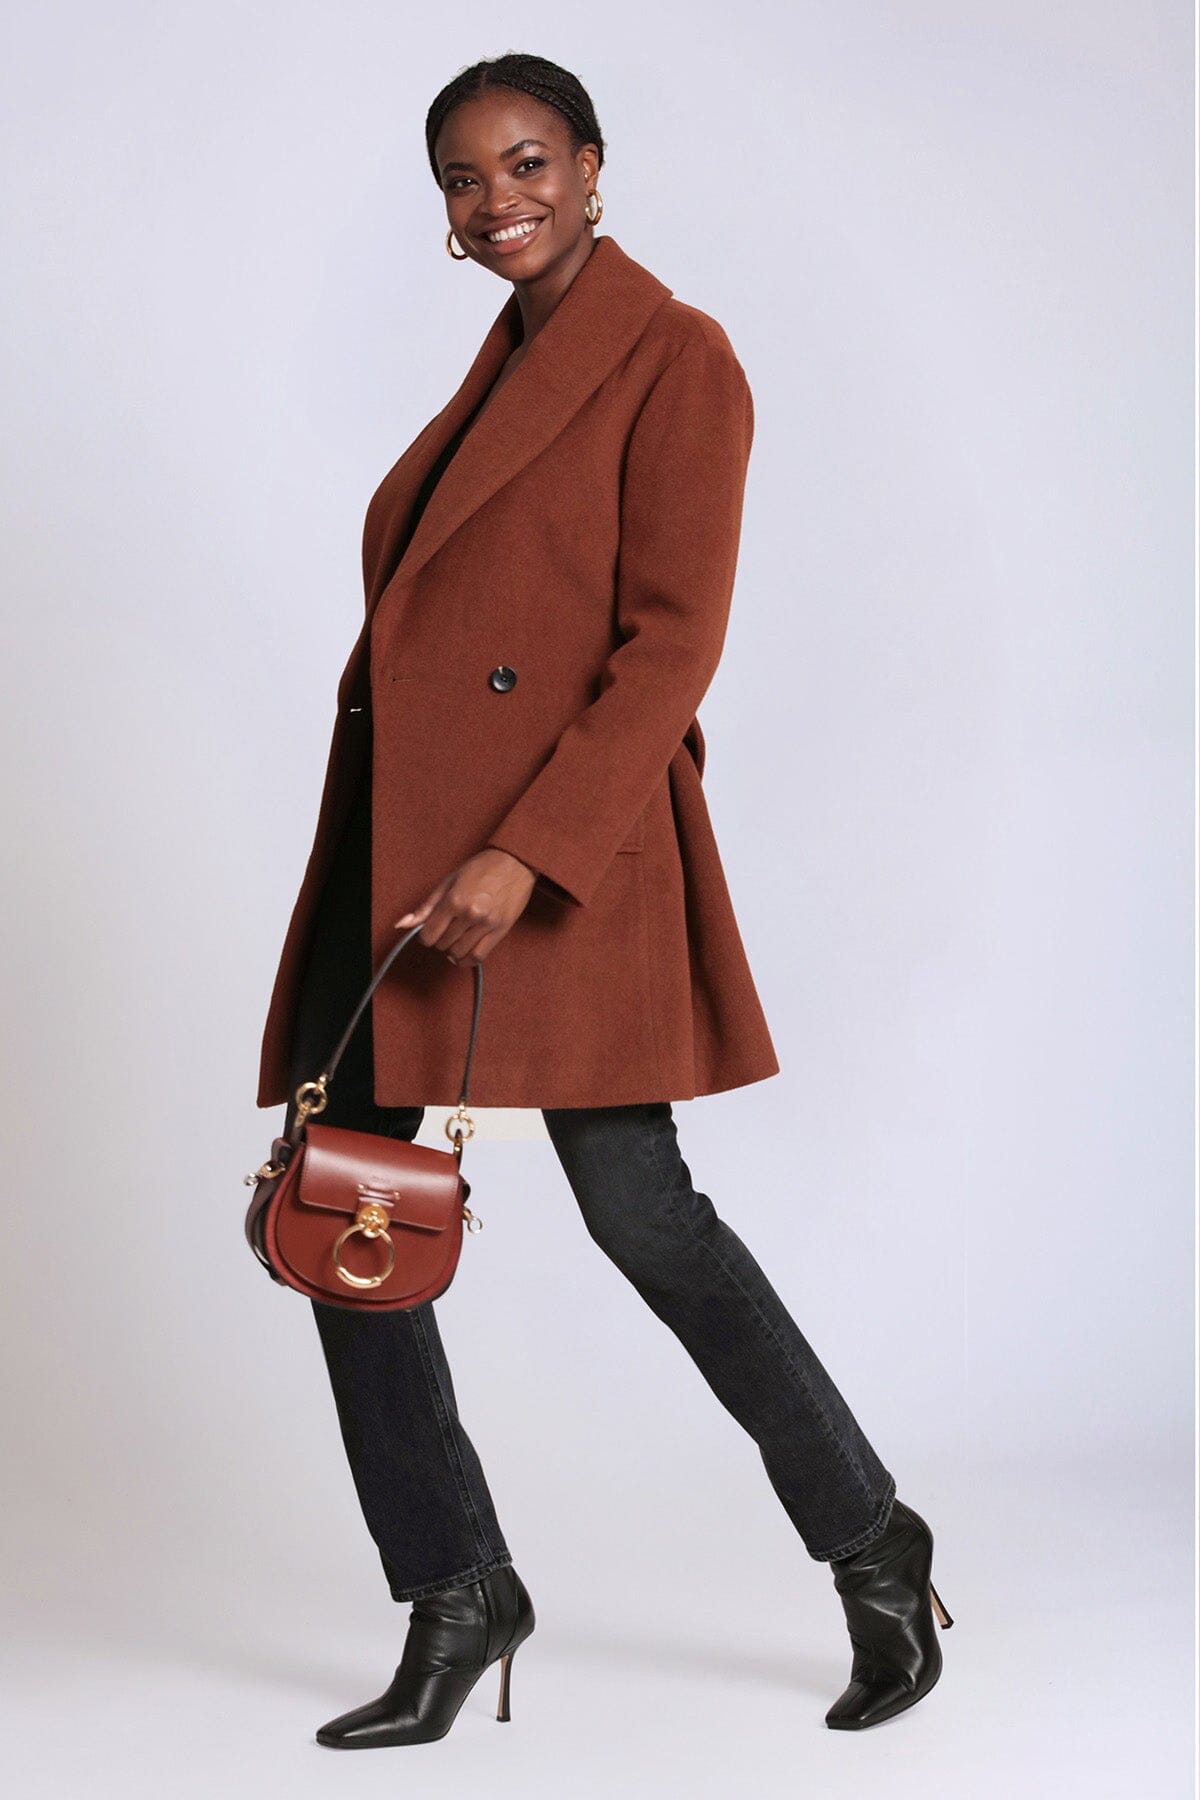 Cinnamon brown wool blend belted shawl collar peacoat coat - figure flattering office to date night peacoats coats for women